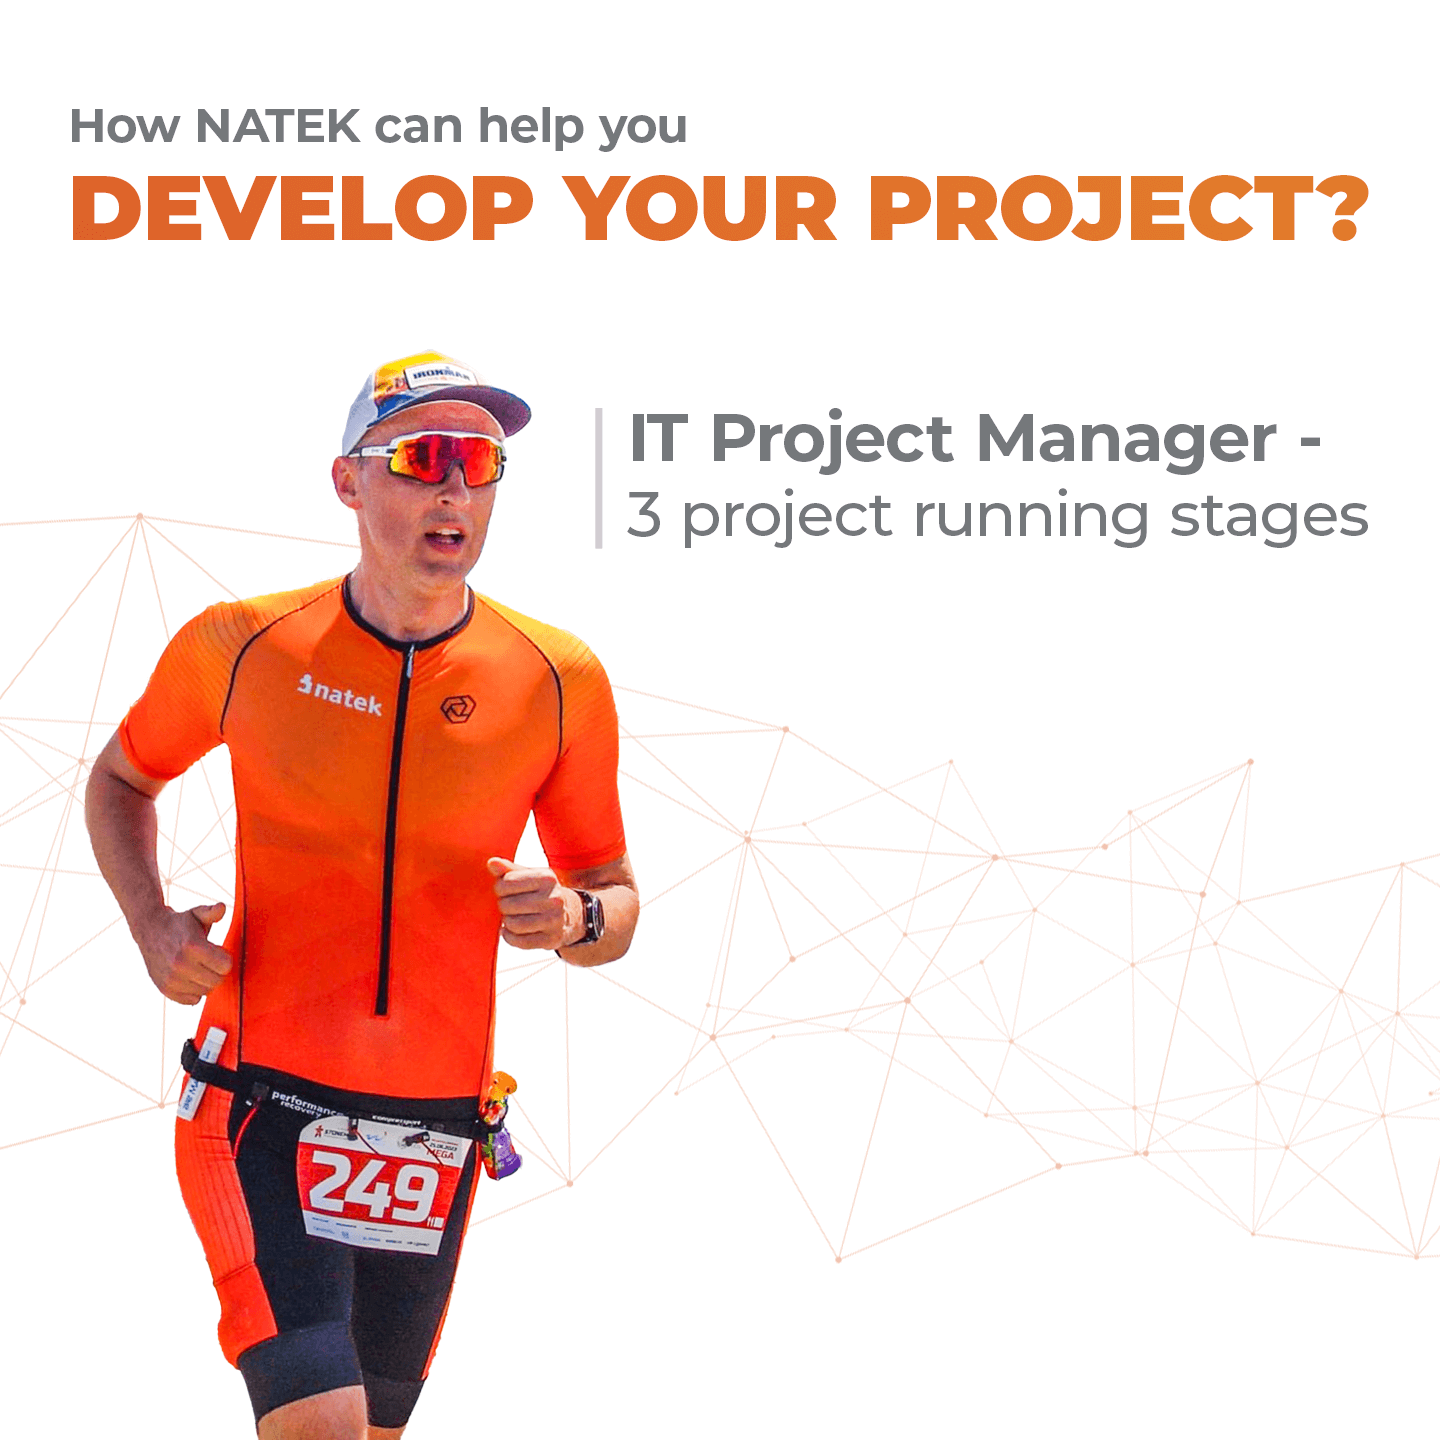 IT Project Manager - develop your project with a NATEK Expert